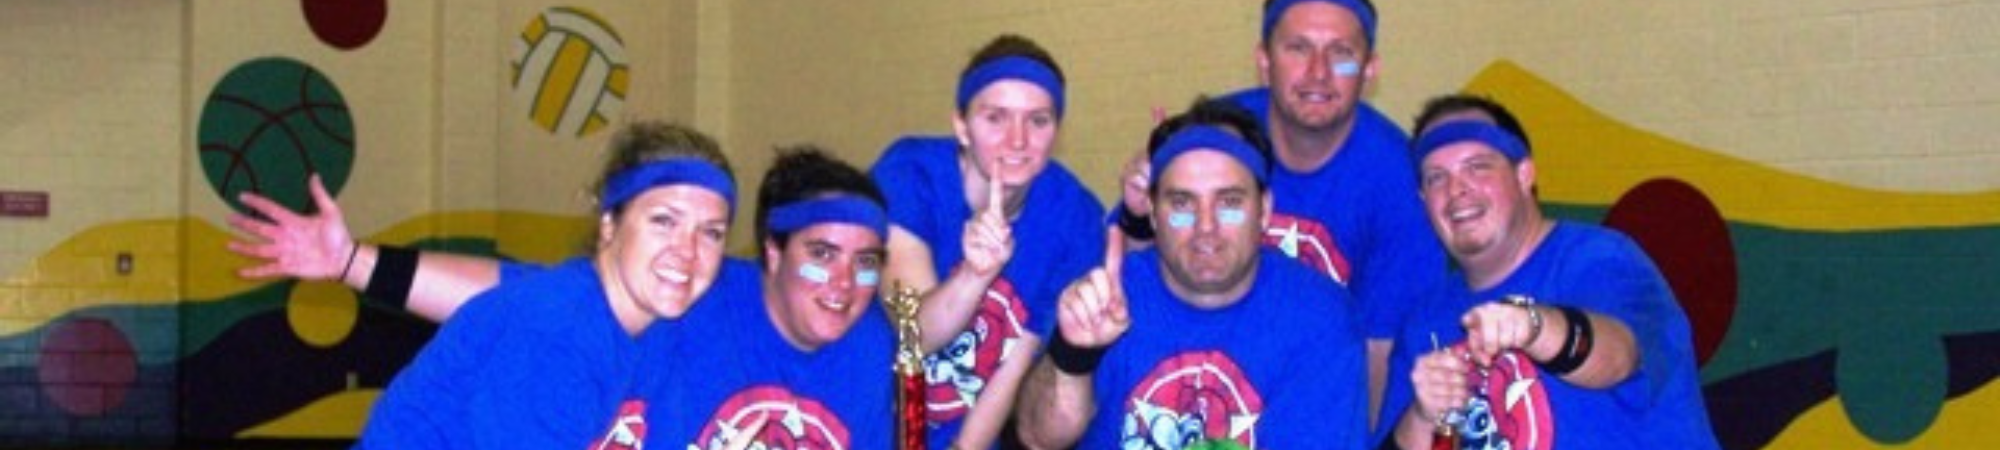 Throwback picture of dodgeball league at Kelly Rec in the gym, Group in matching tshirt making #1 sign with their hands